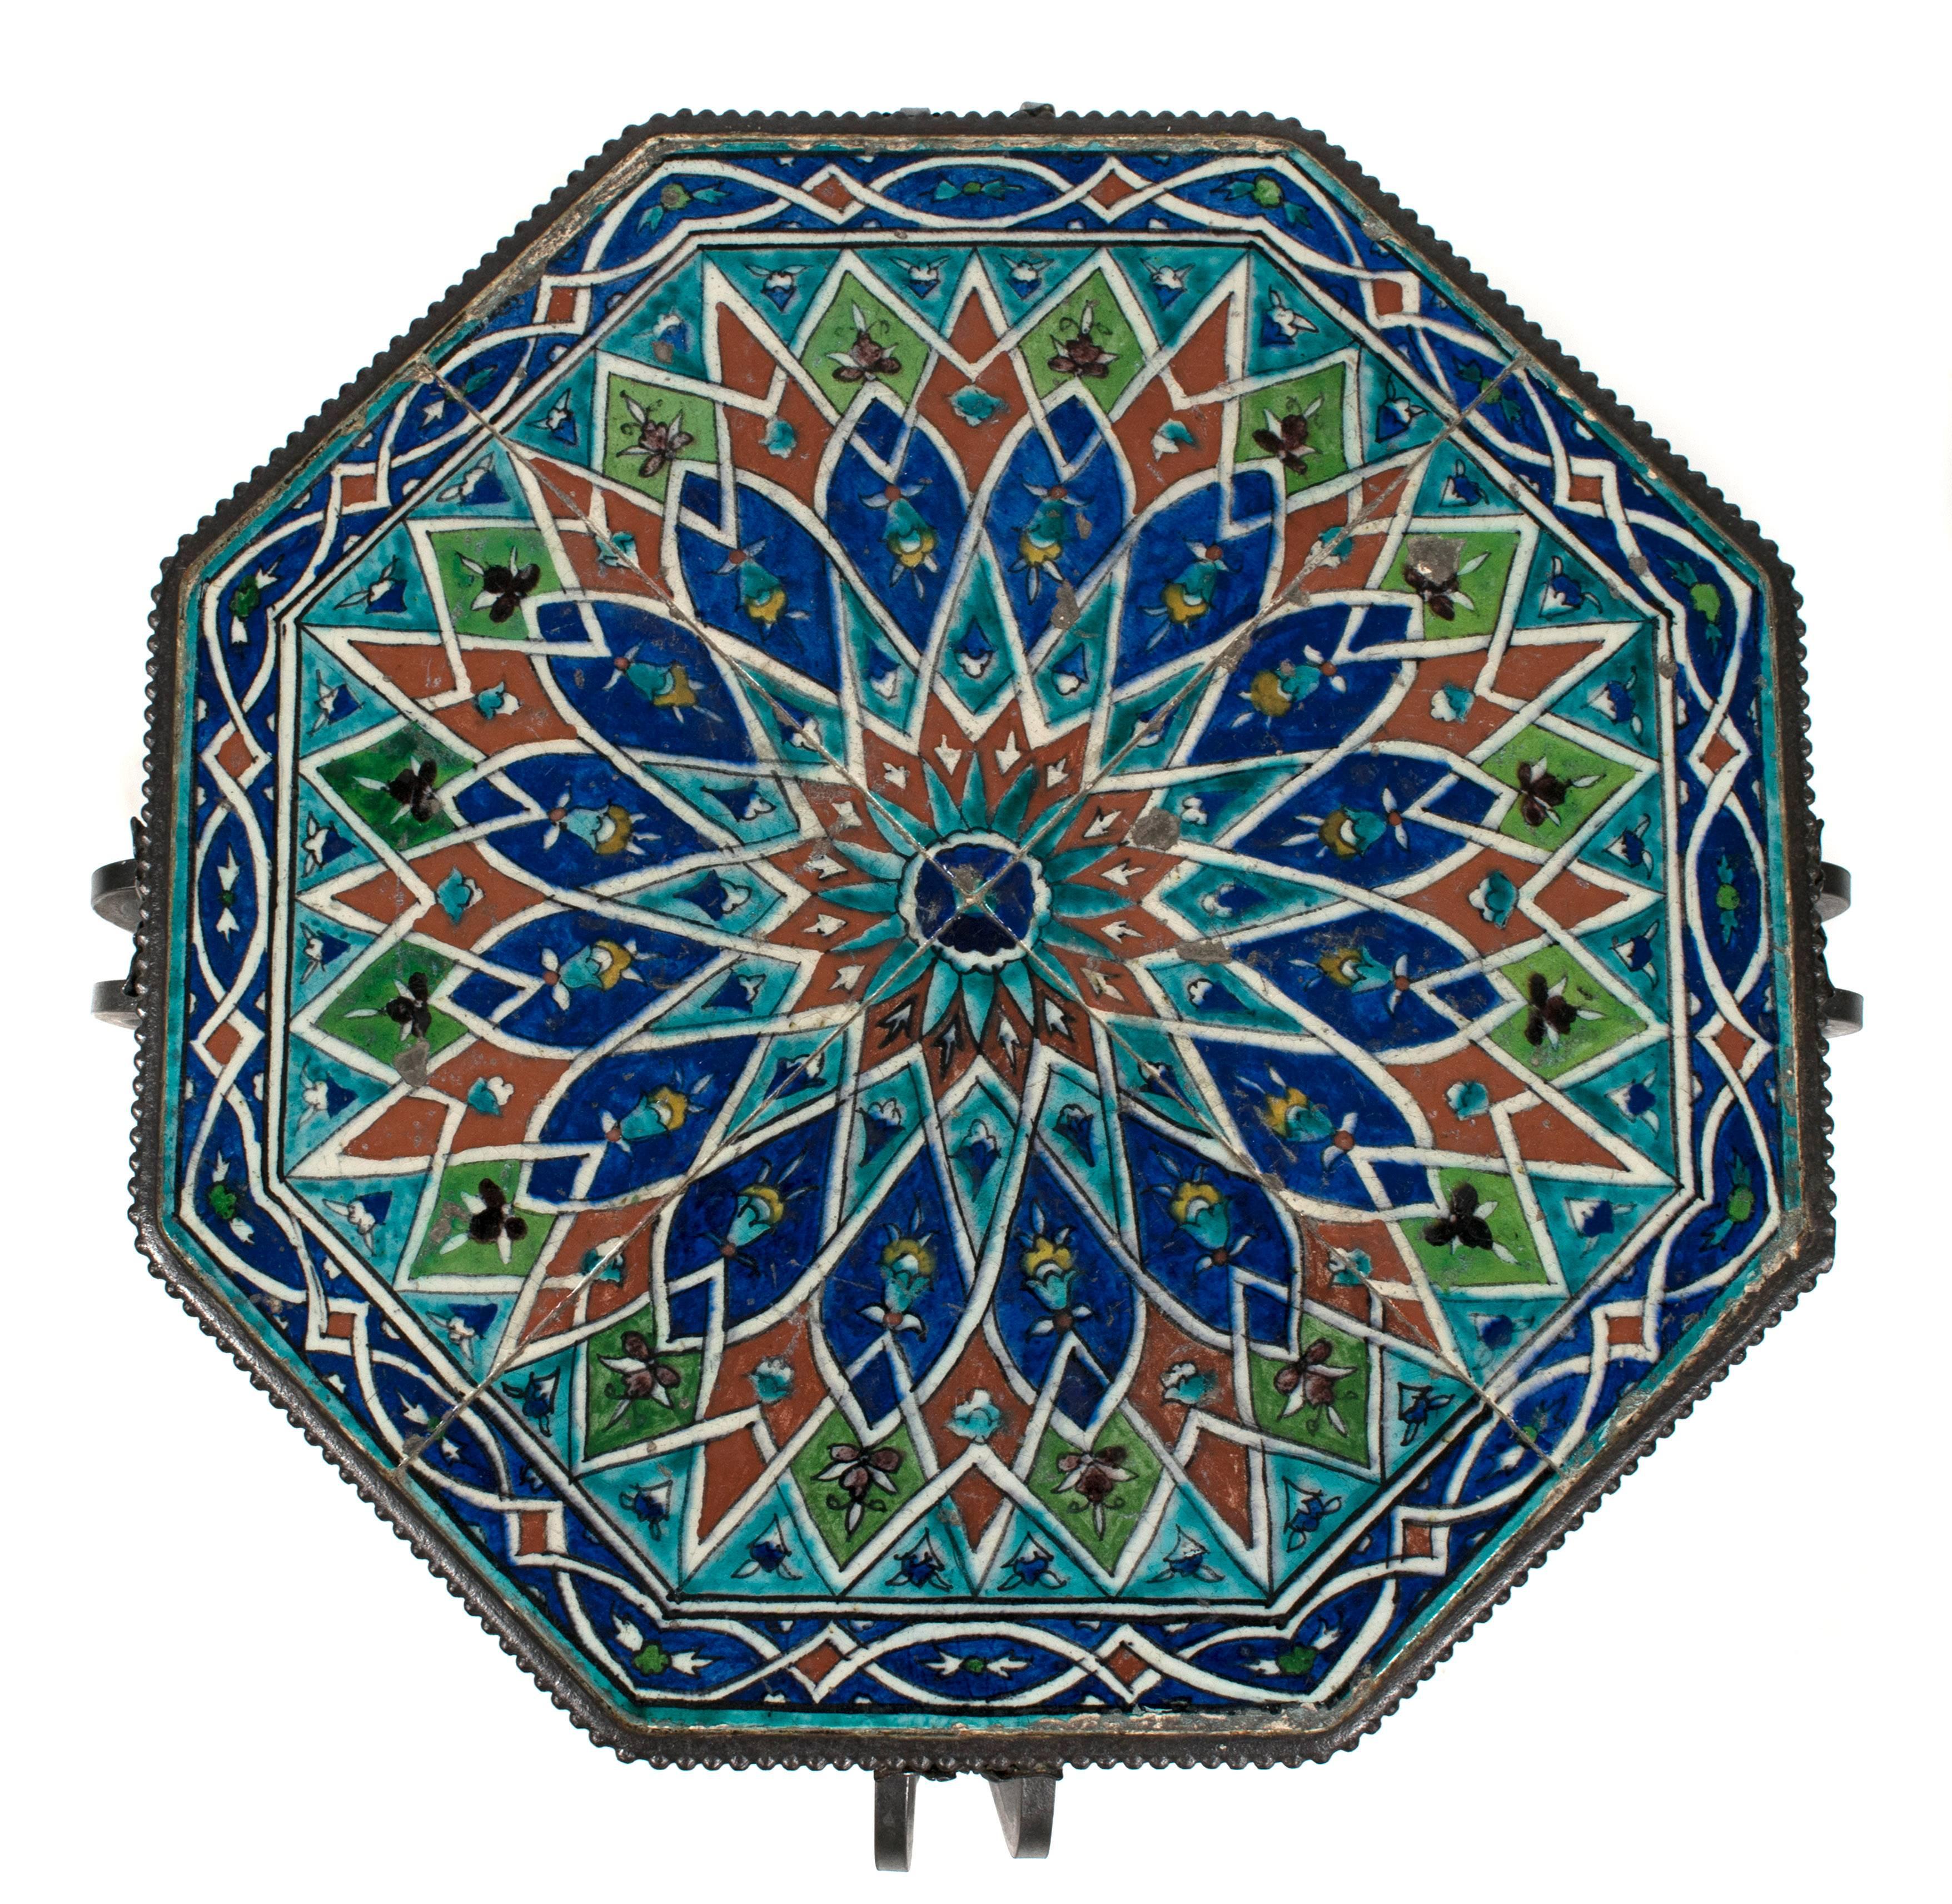 A French hand-wrought iron occasional table, circa 1930s. Four colorful terracotta tiles are inset into wrought iron surround with bead and floral decoration.